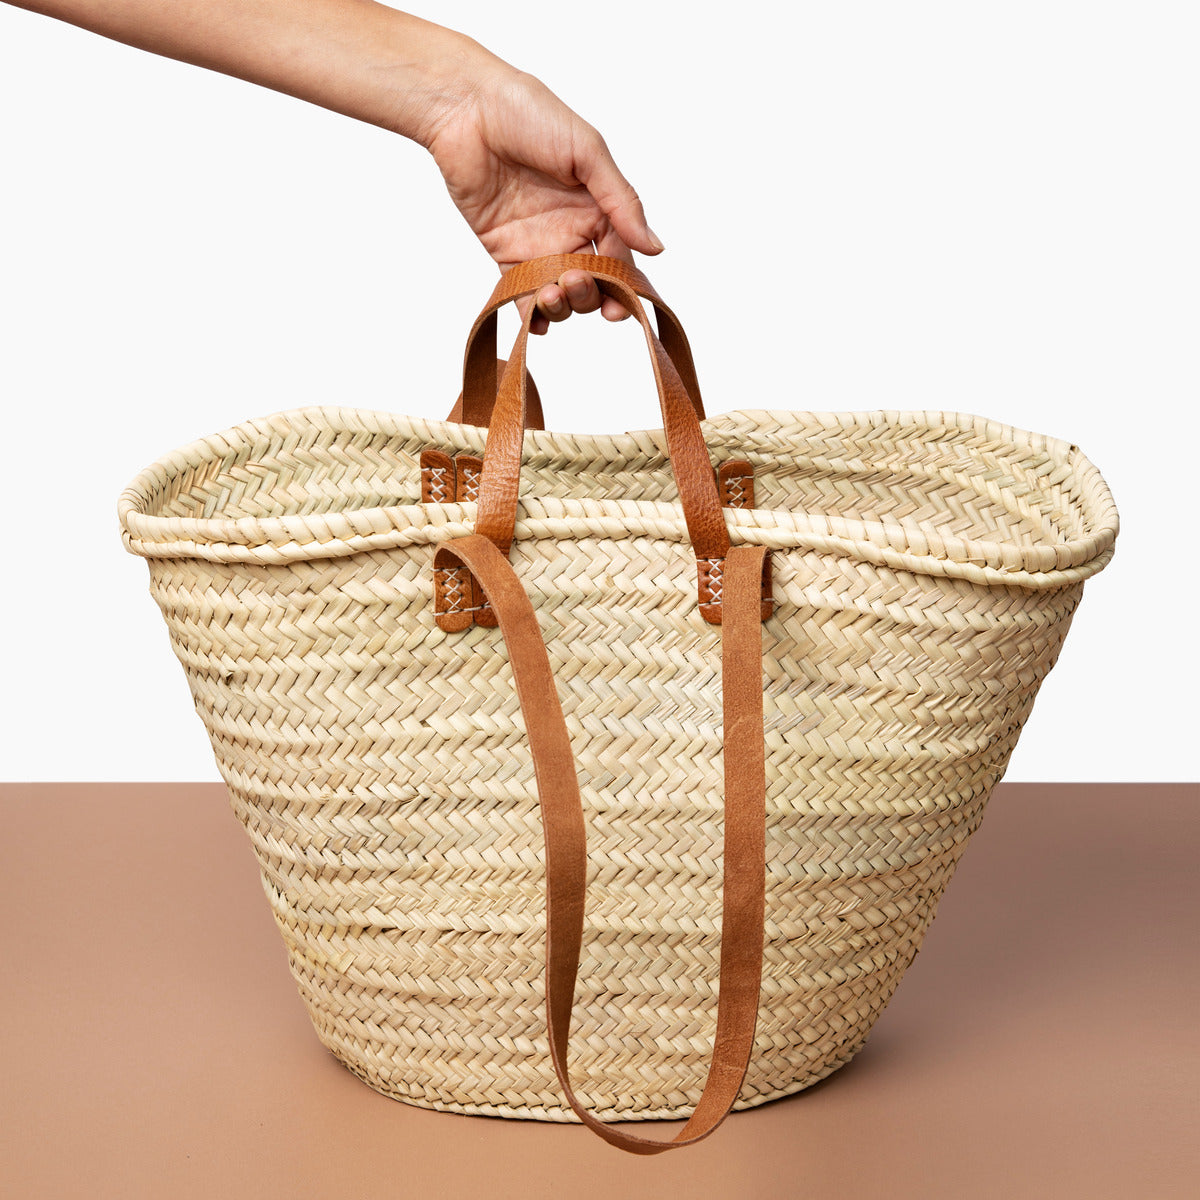 French Baskets, Handmade Straw French Baskets and Wholesale Straw bags